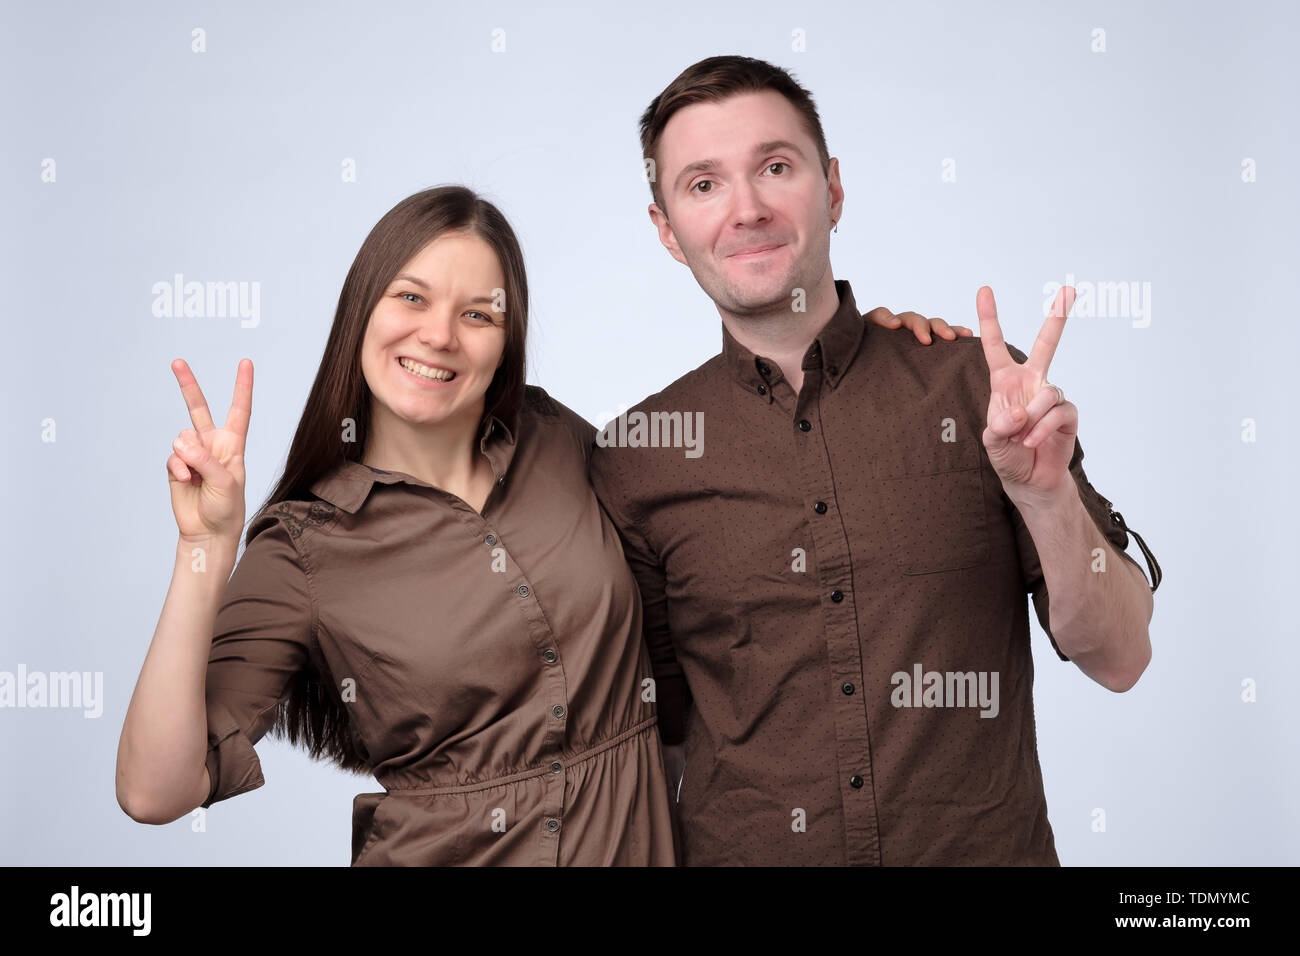 Couple making peace or victory sign with index and middle fingers Stock Photo